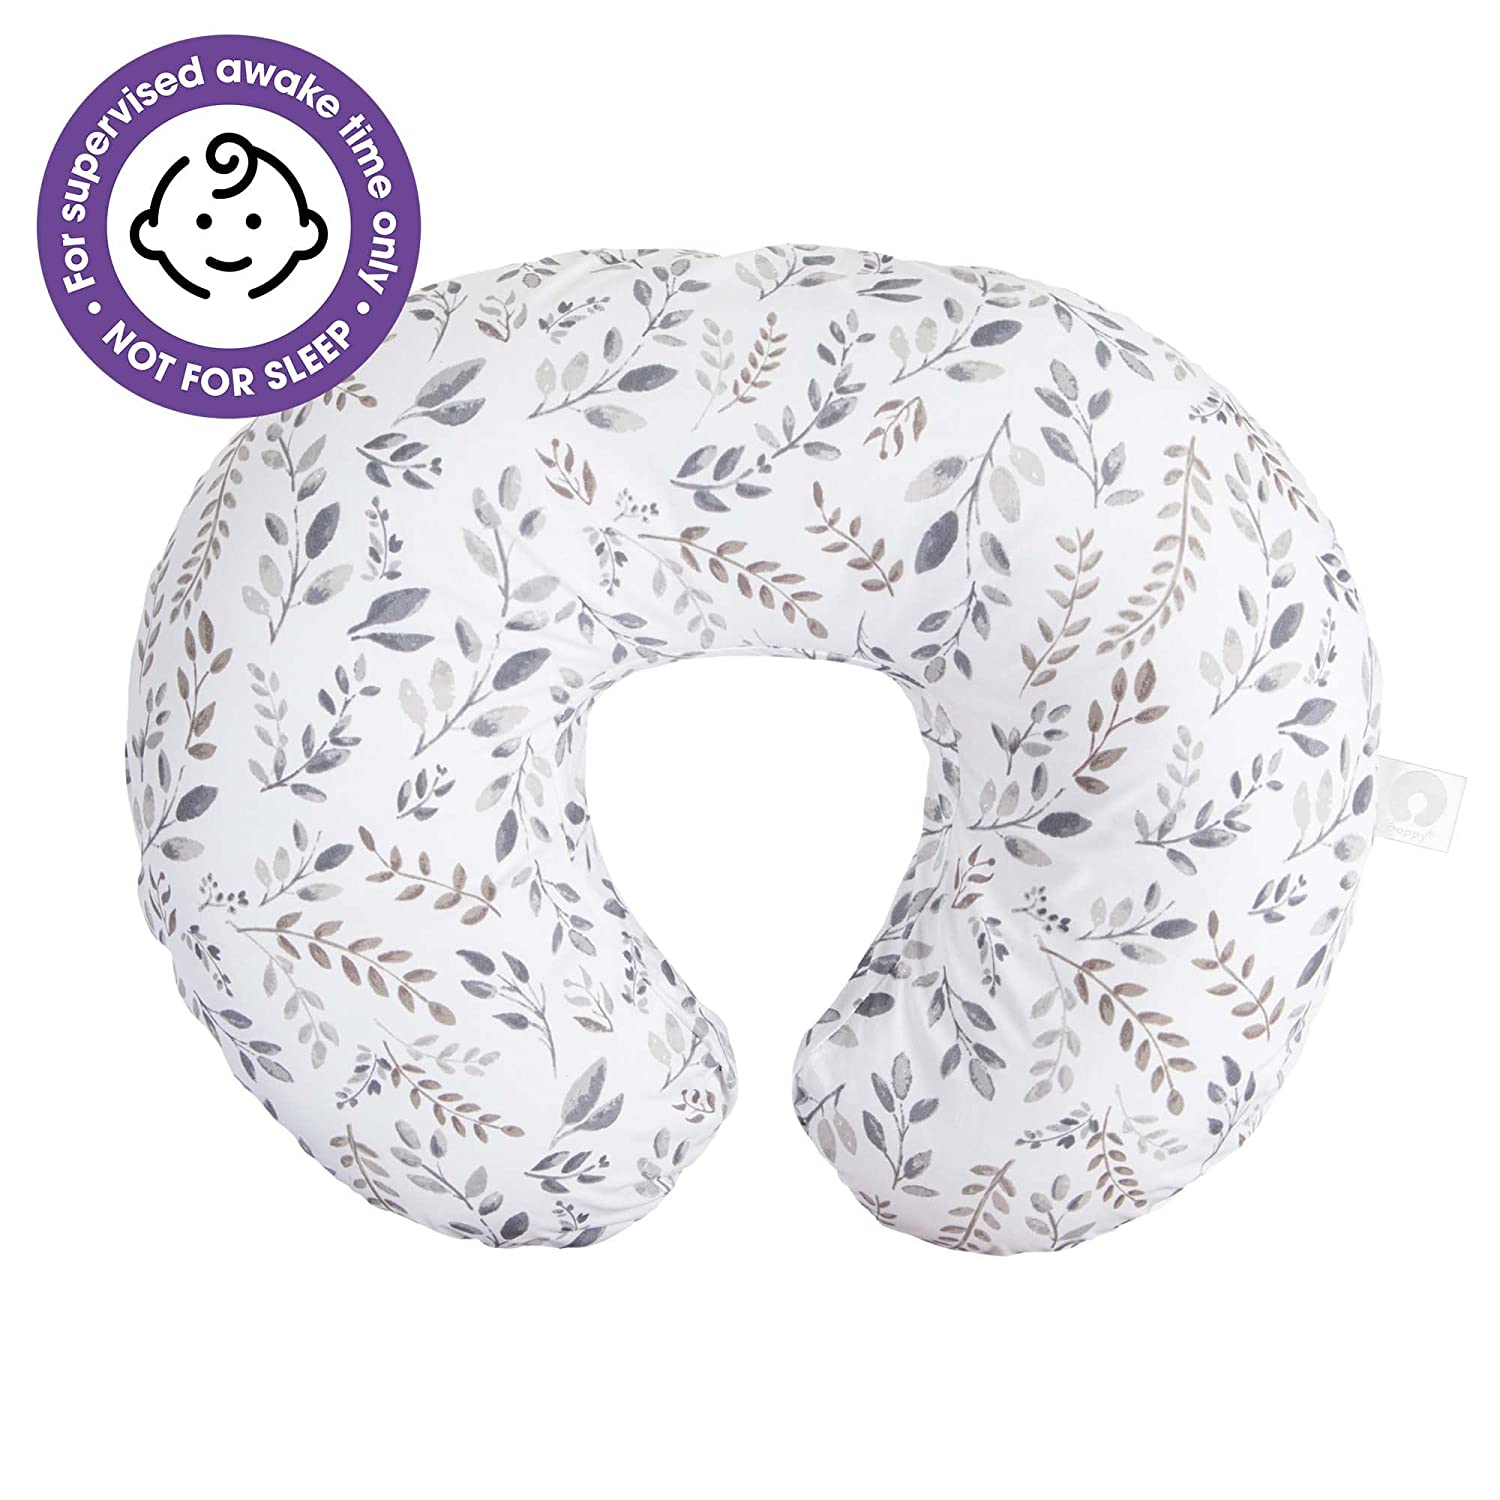 Boppy Nursing Pillow Original Support, Gray Taupe Leaves, Ergonomic Nursing Essentials for Bottle and Breastfeeding, Firm Fiber Fill, with Removable Nursing Pillow Cover, Machine Washable - image 5 of 7